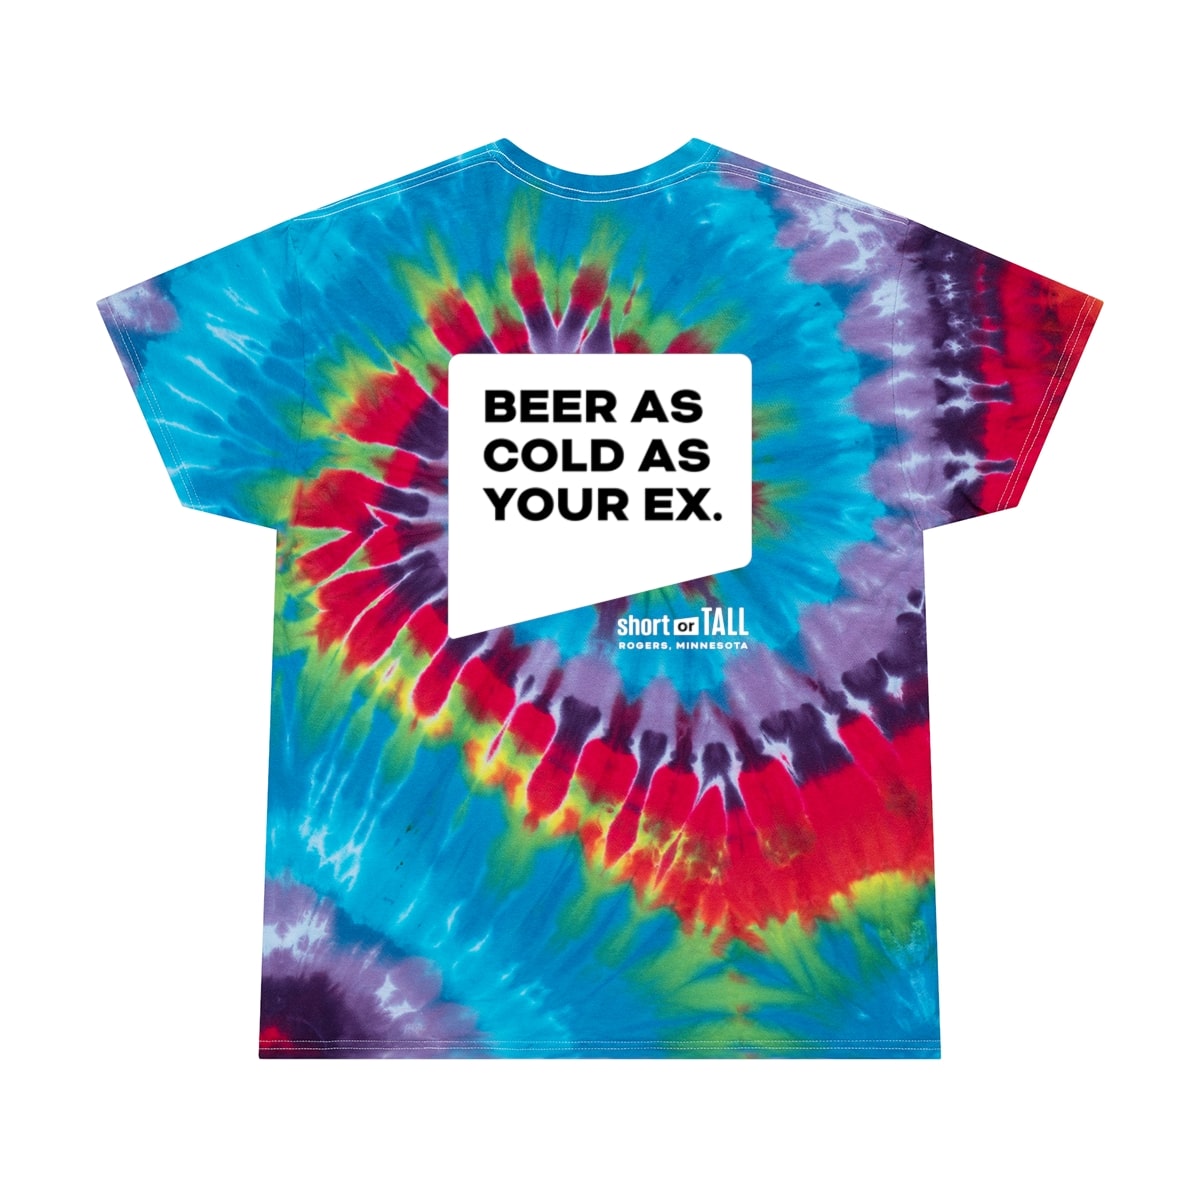 “Beer As Cold As Your Ex” Unisex Tie Dye T-Shirt